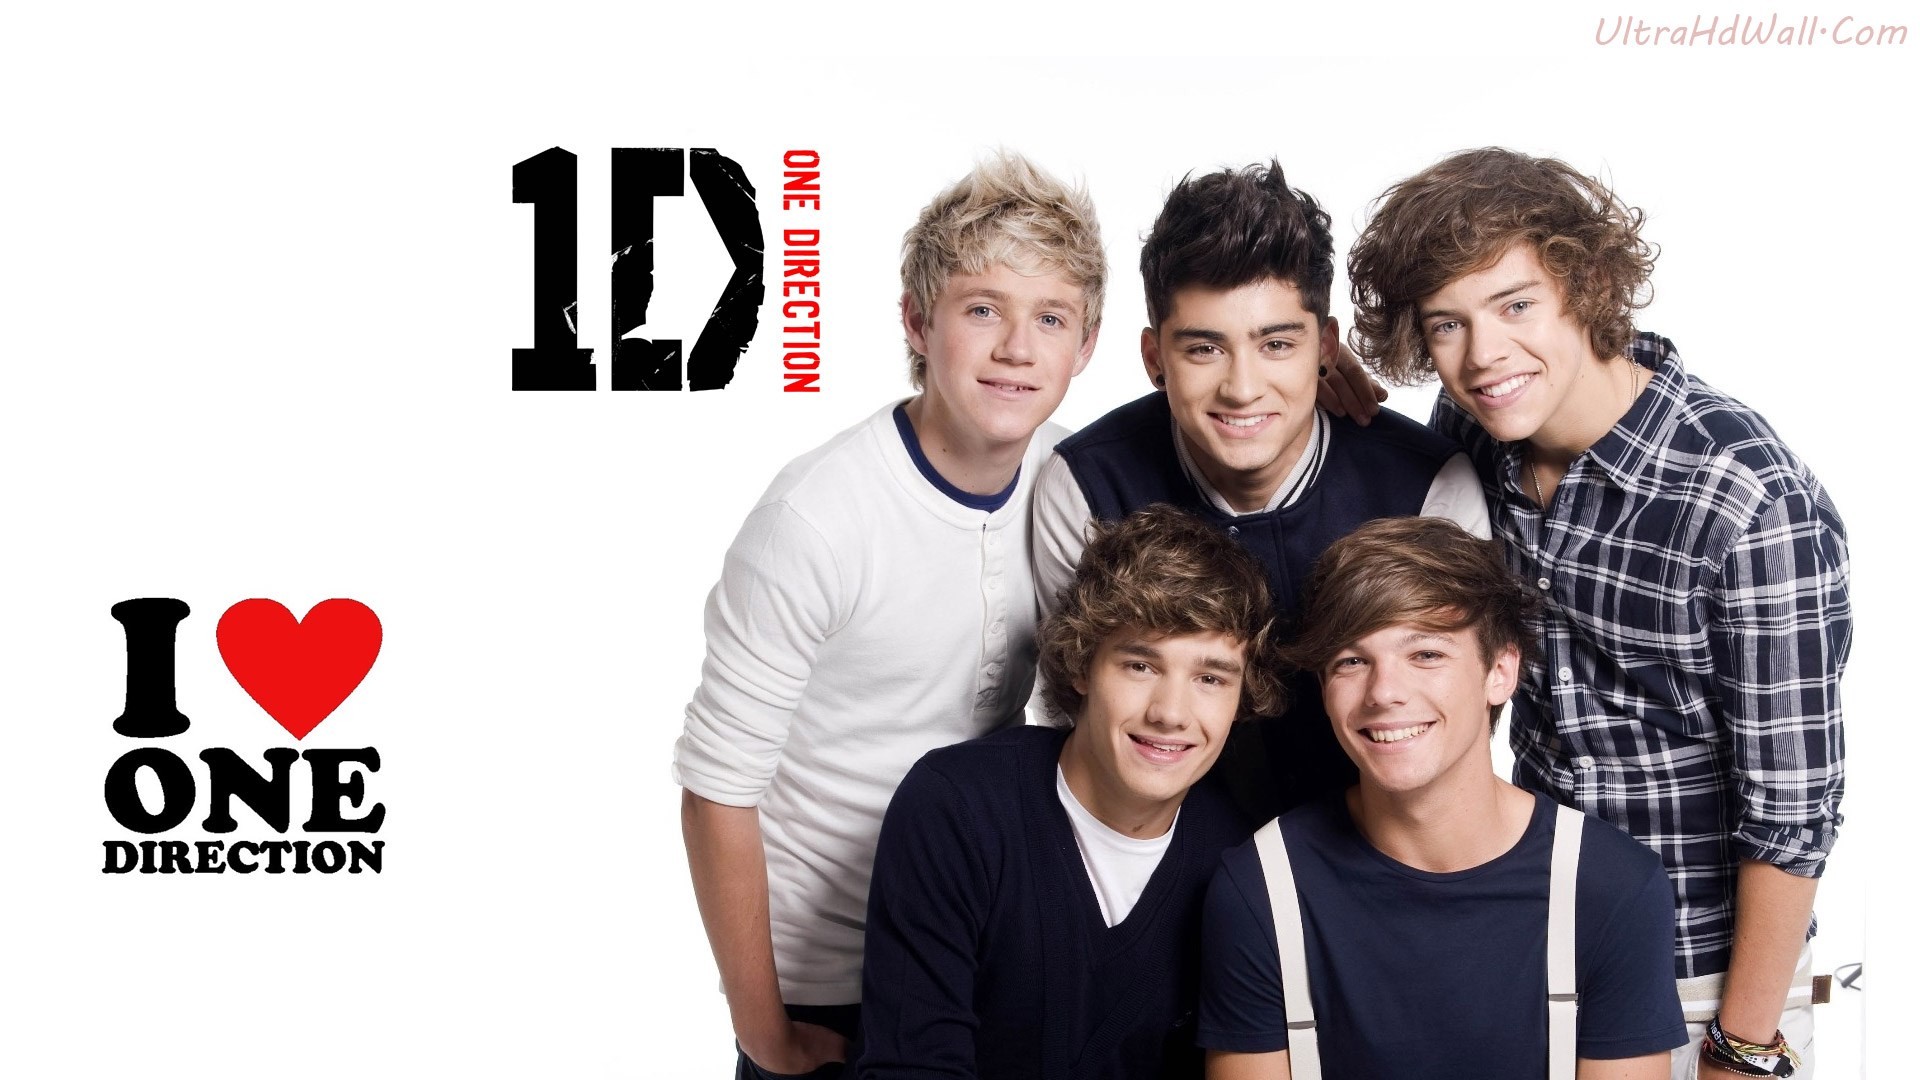 one direction laptop wallpaper 2015